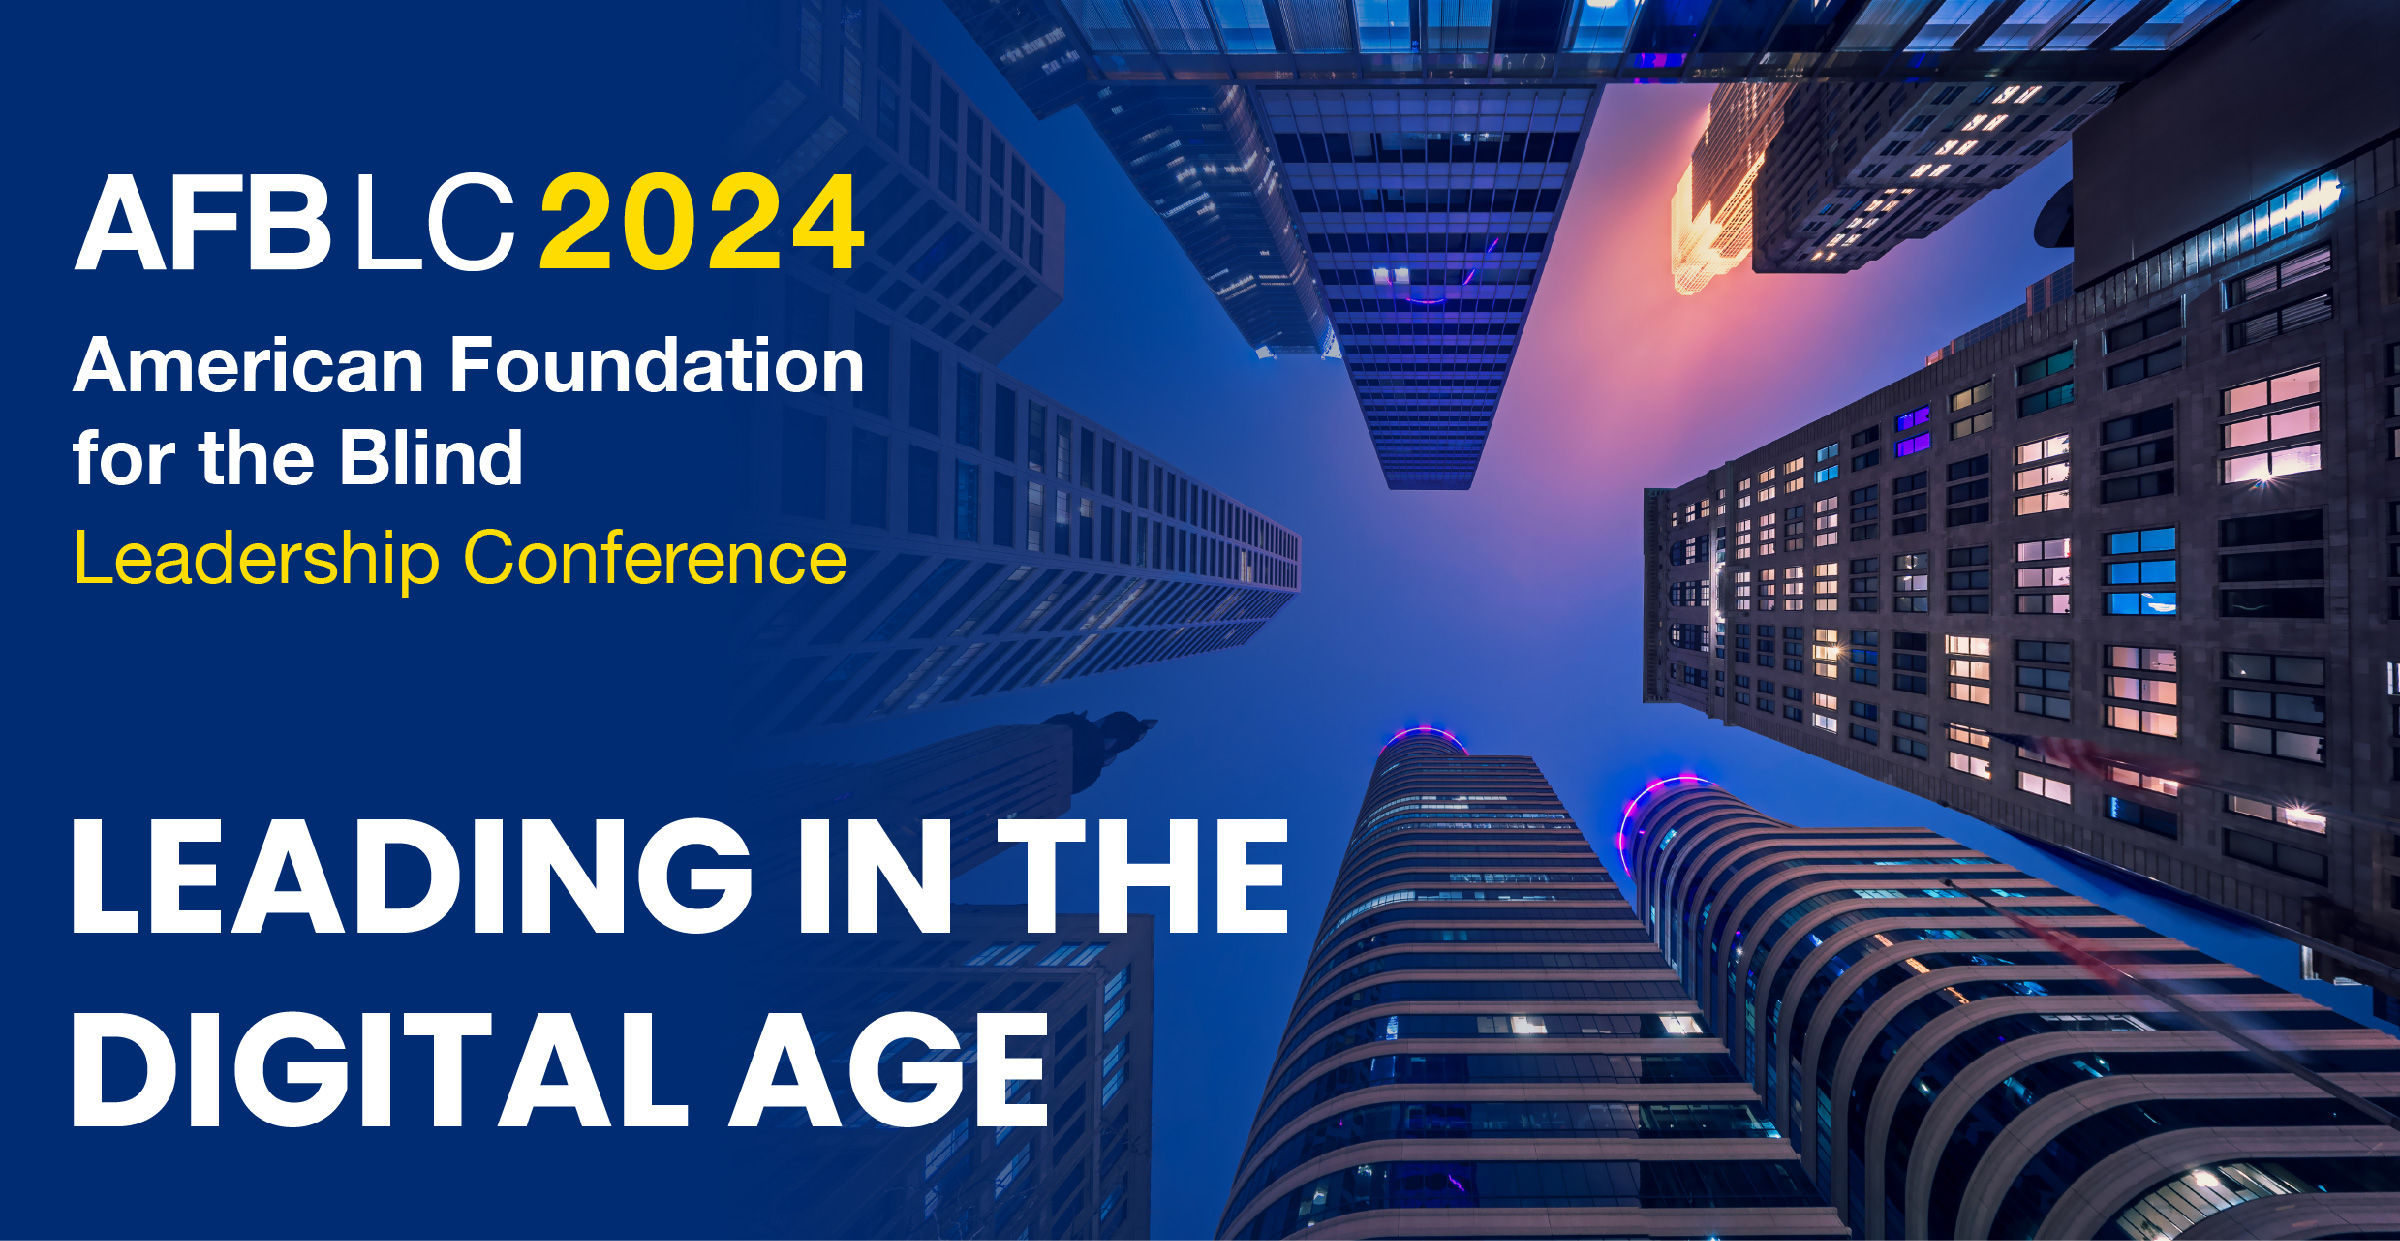 2024 American Foundation for the Blind Leadership Conference. Leading in the Digital Age.